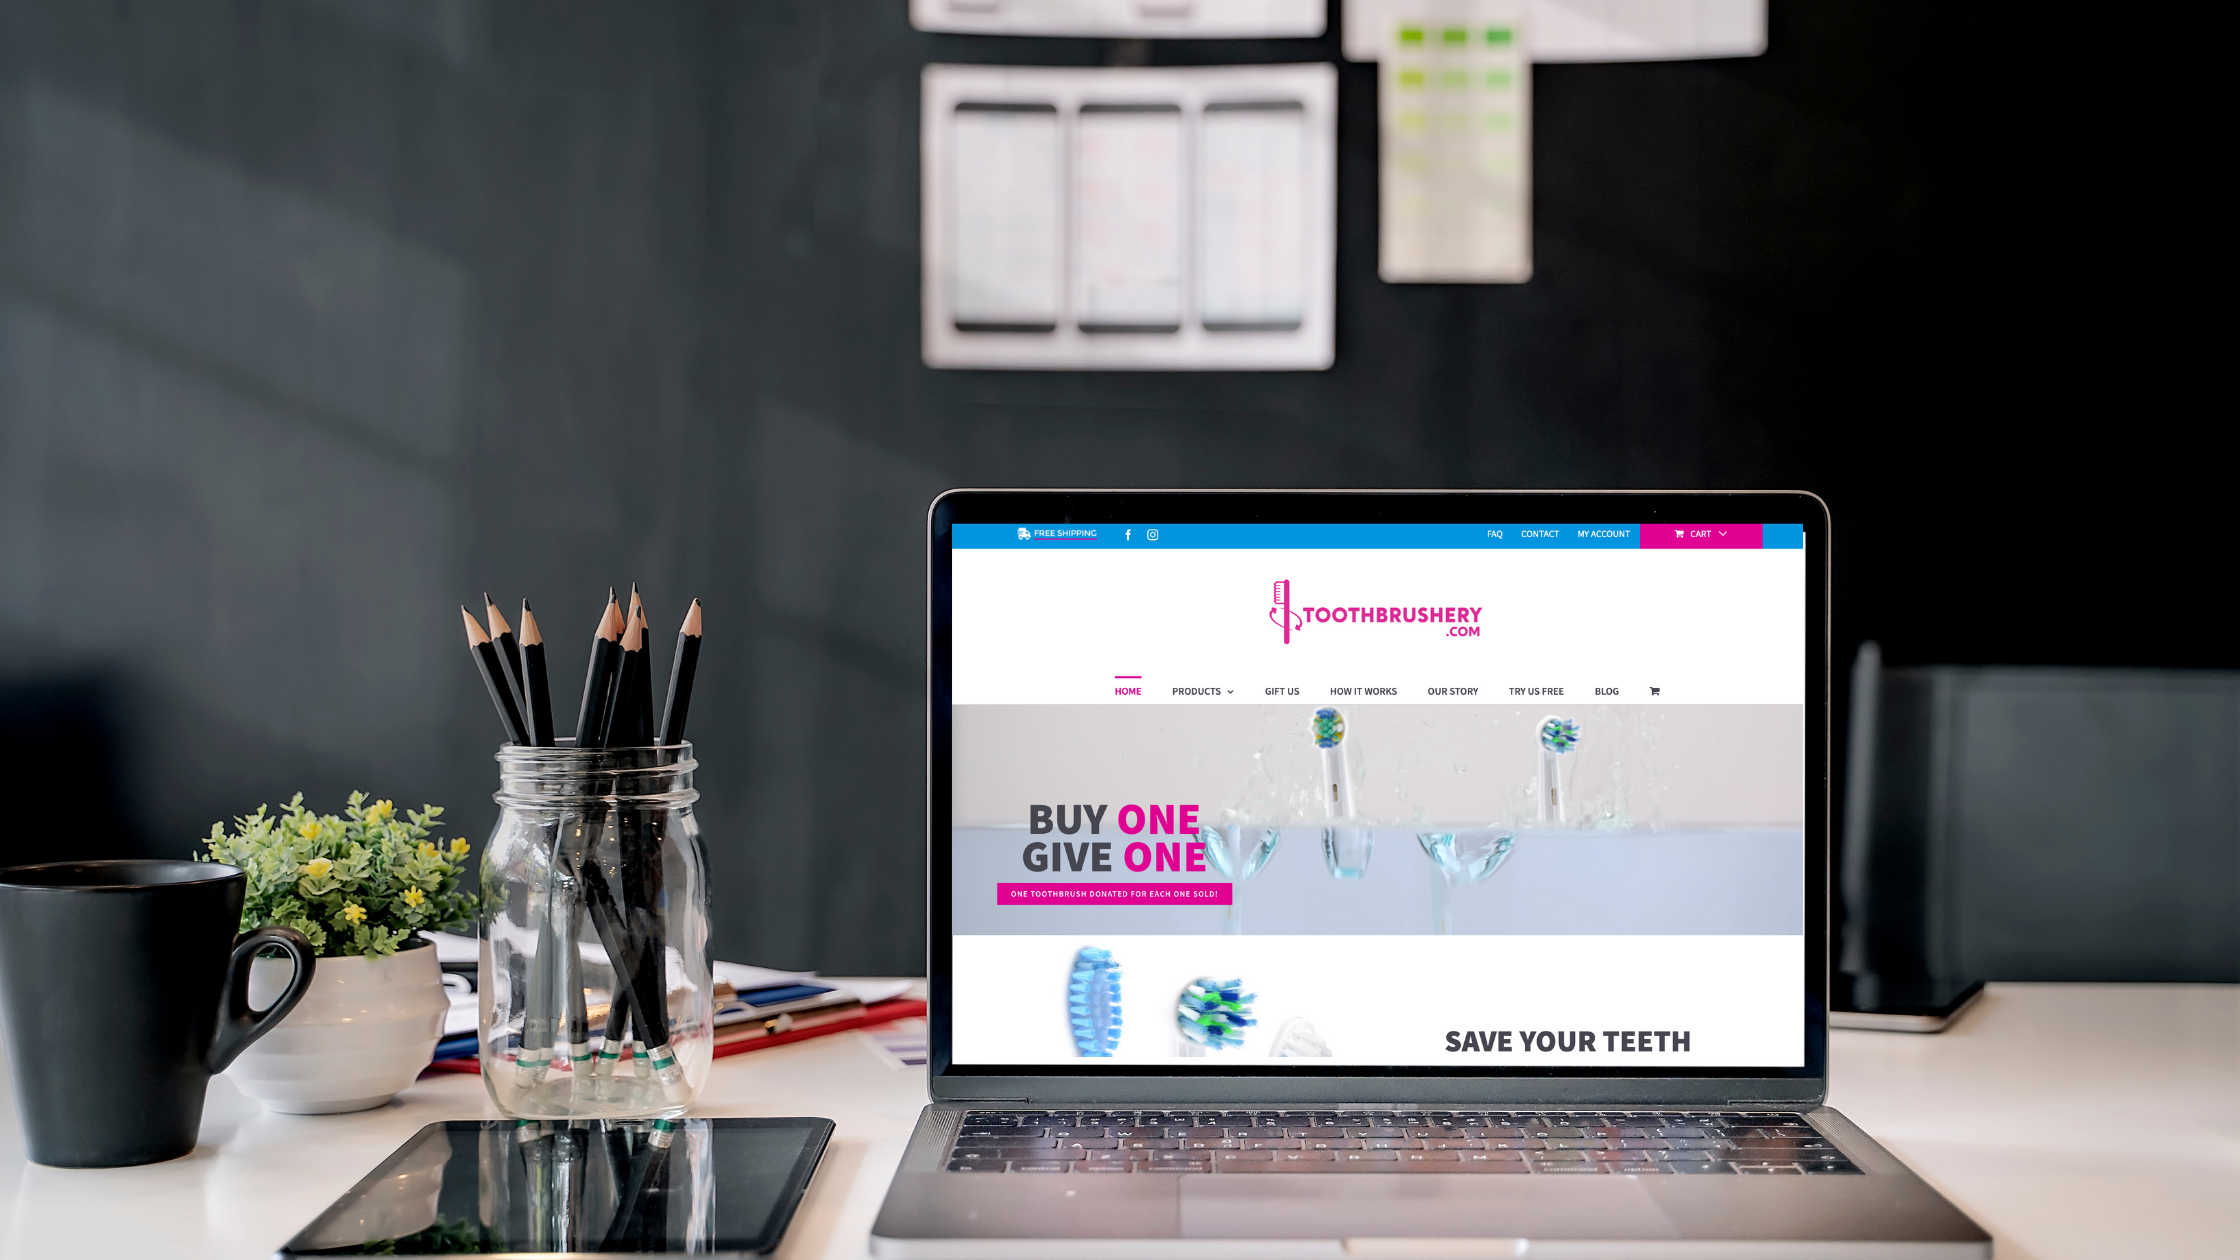 Toothbrushery website redesigned by Puzzle Pieces Marketing